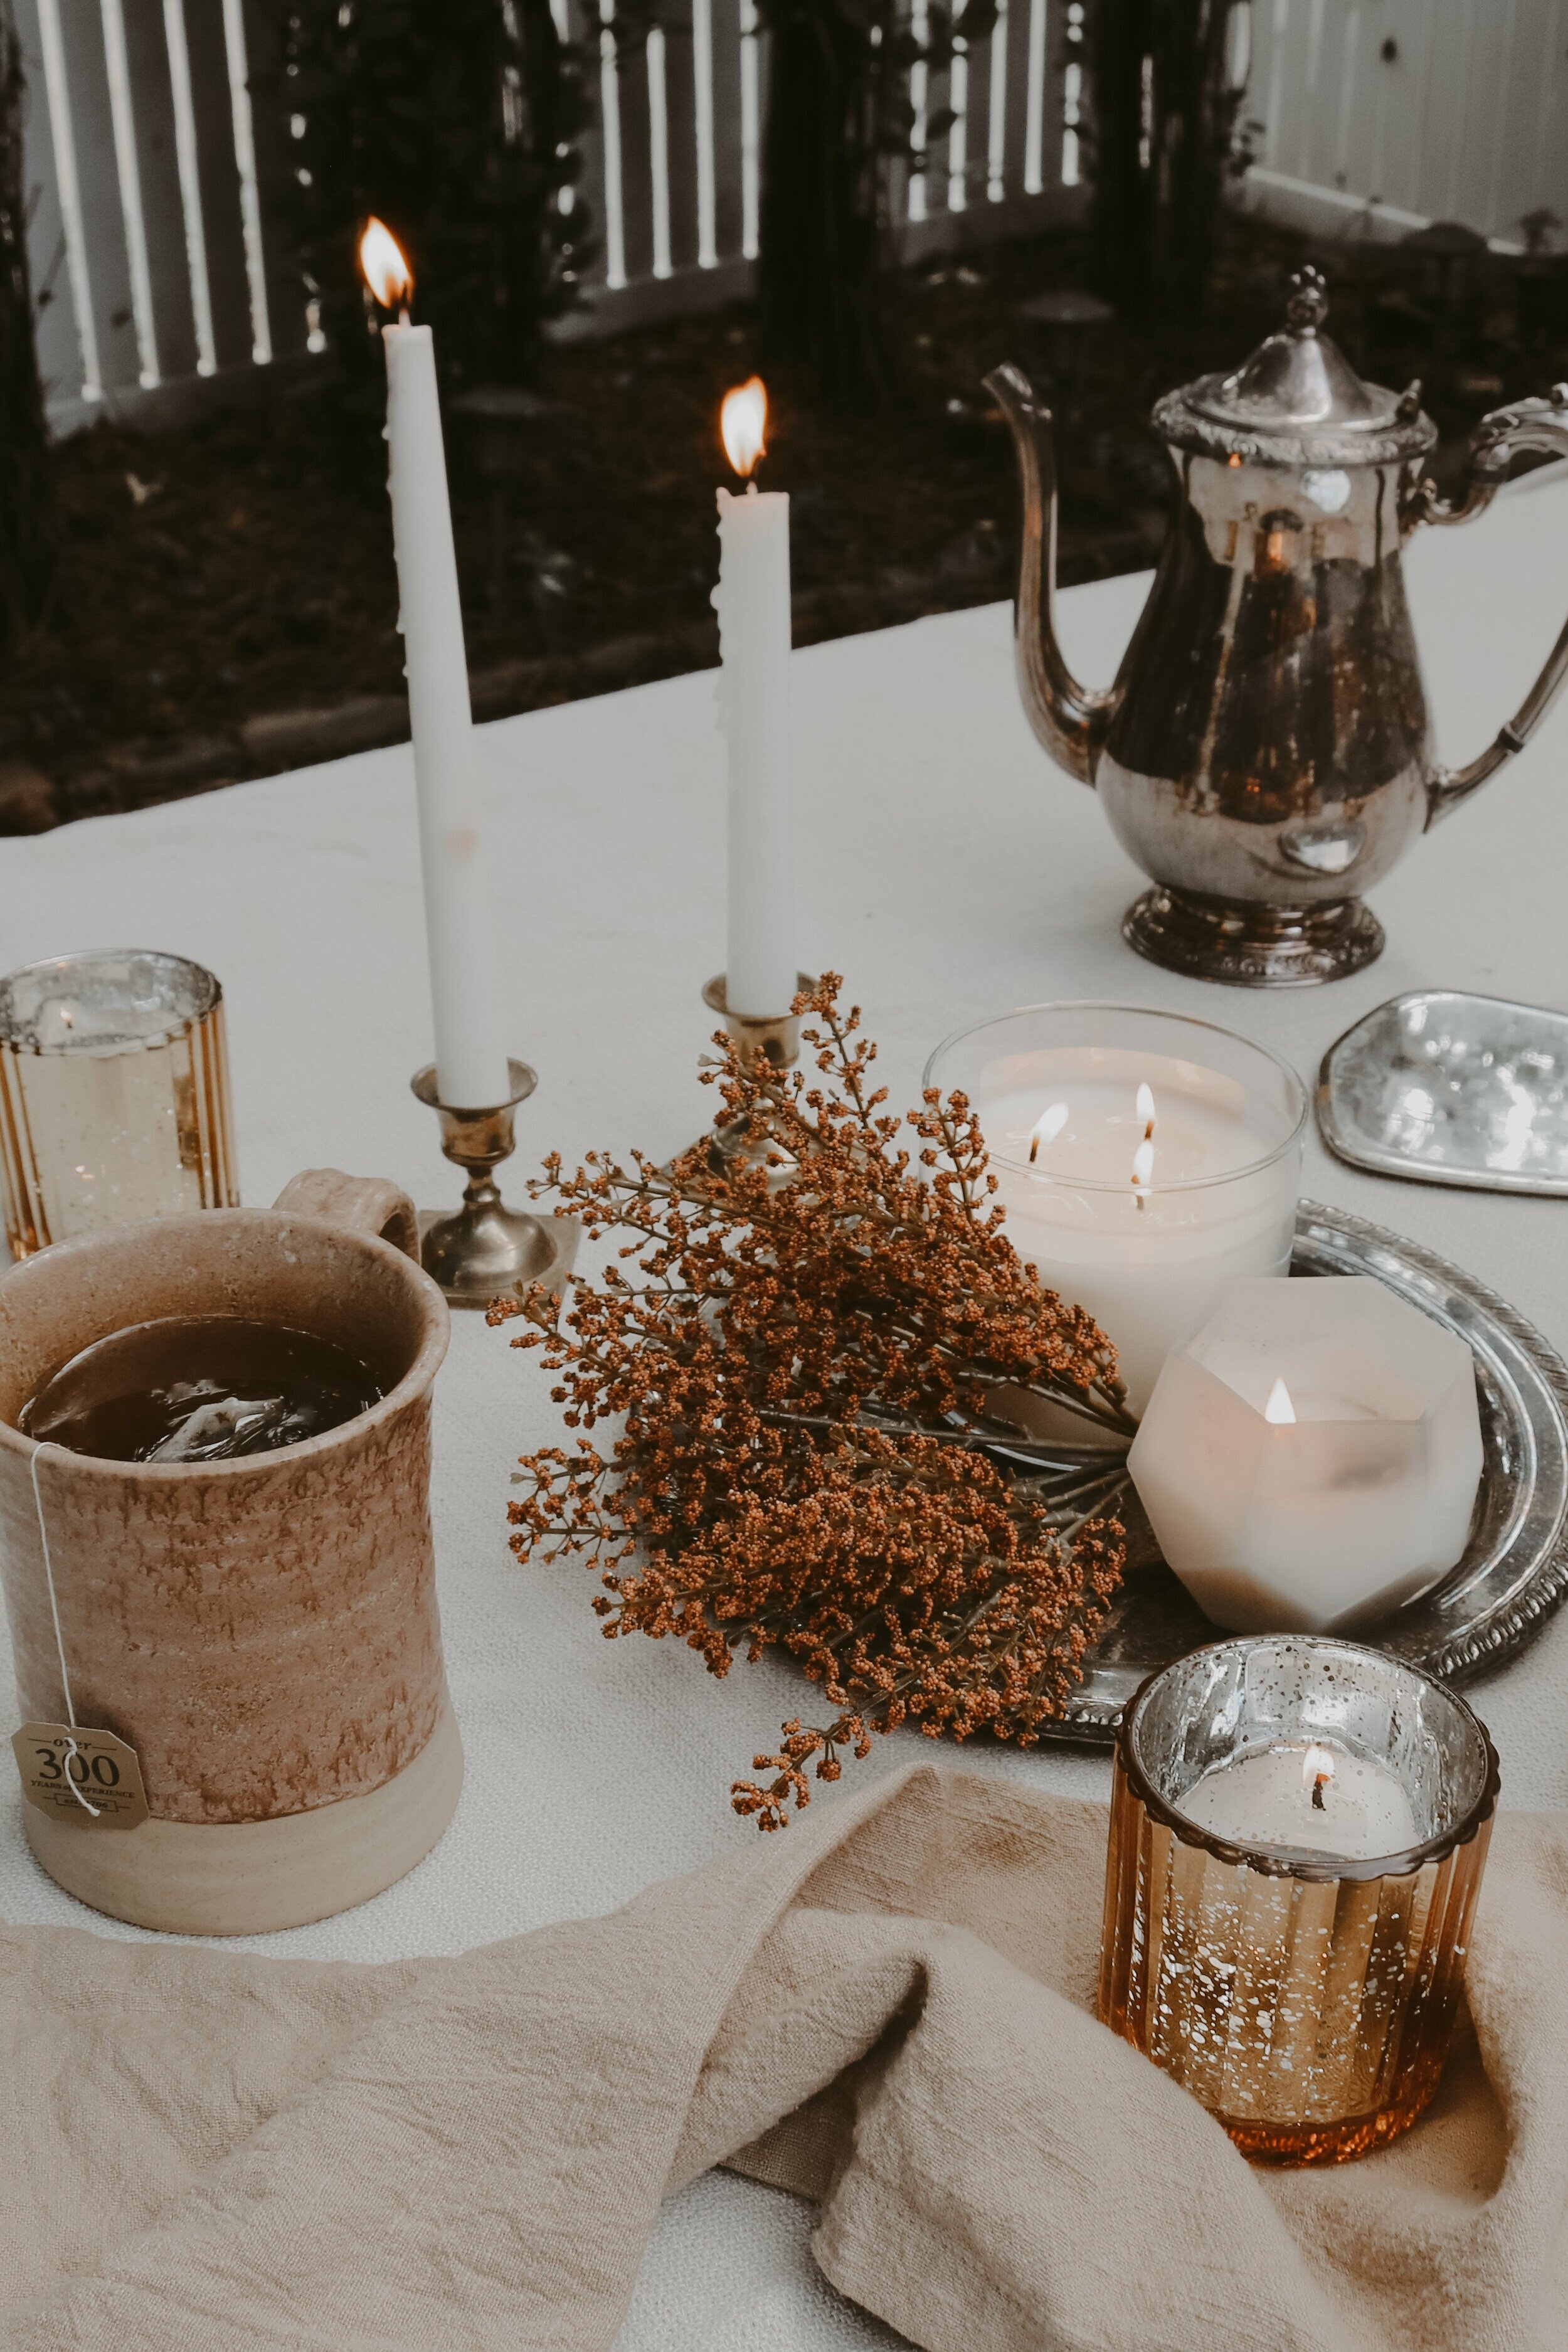 my ultimate and simple cozy needs for guaranteed fall vibes — a styled sage